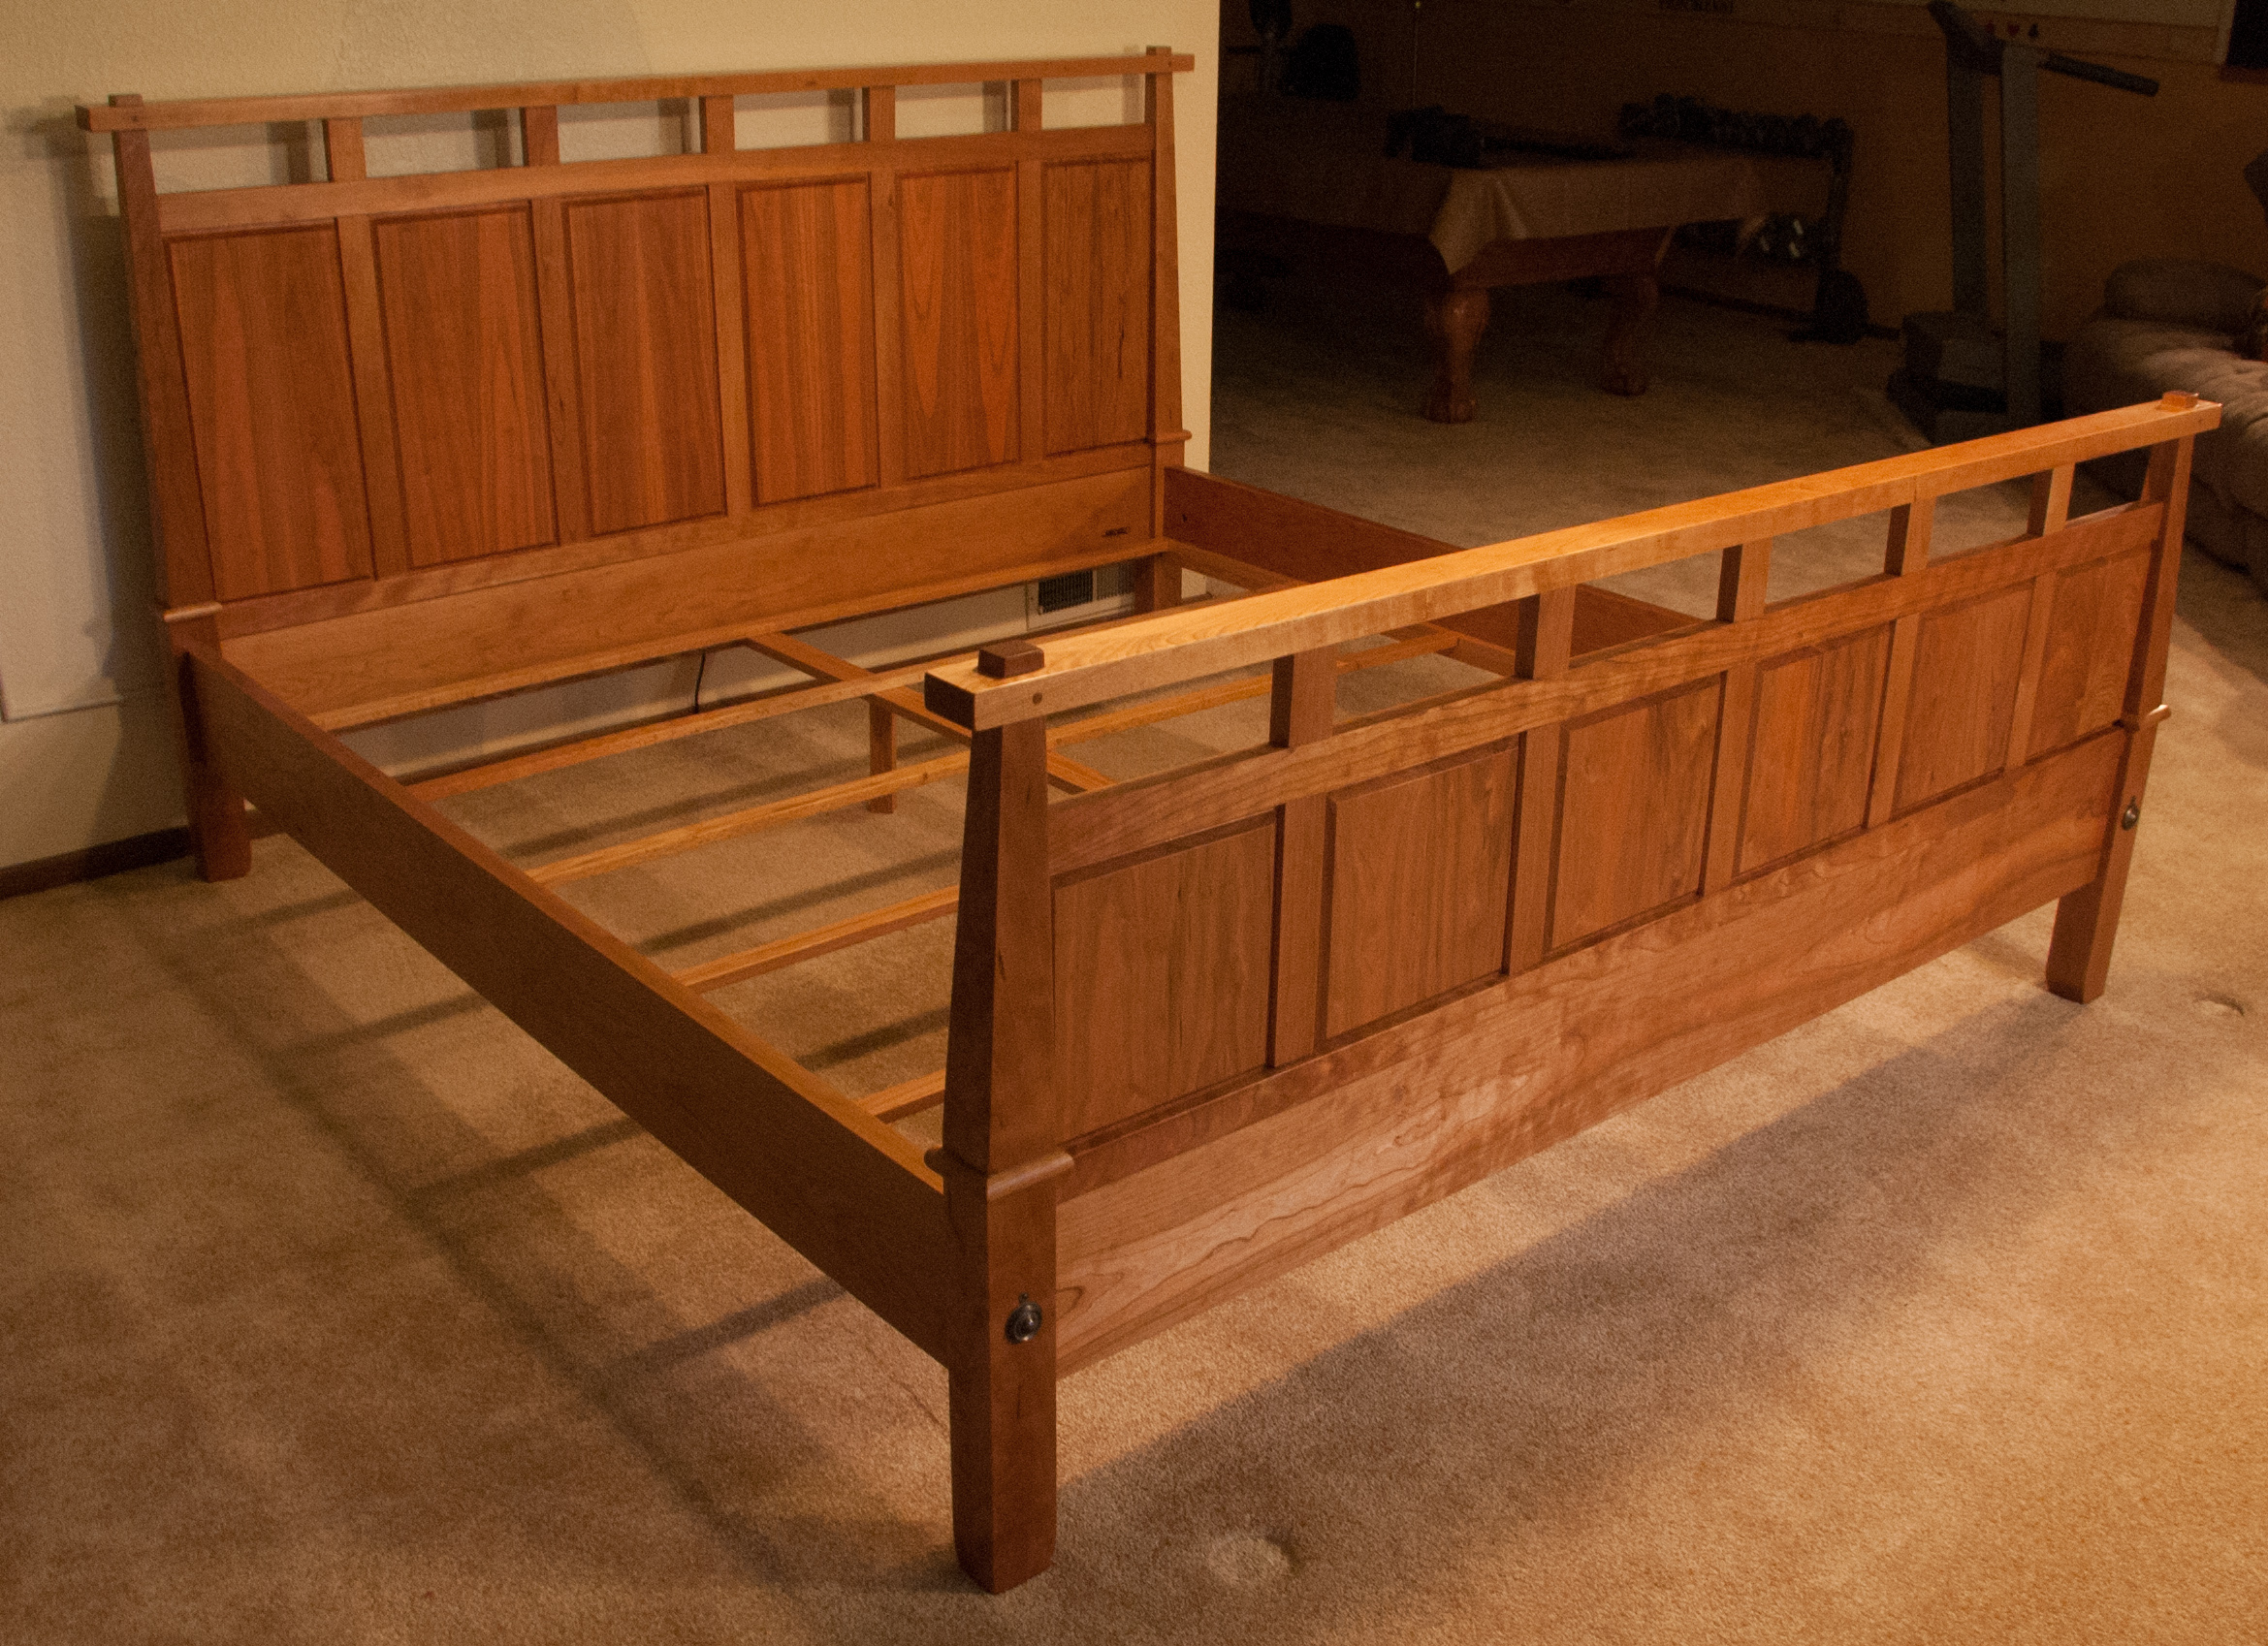 A Frame and Panel King Bed for 2013 | Patrick A. McKinley ...